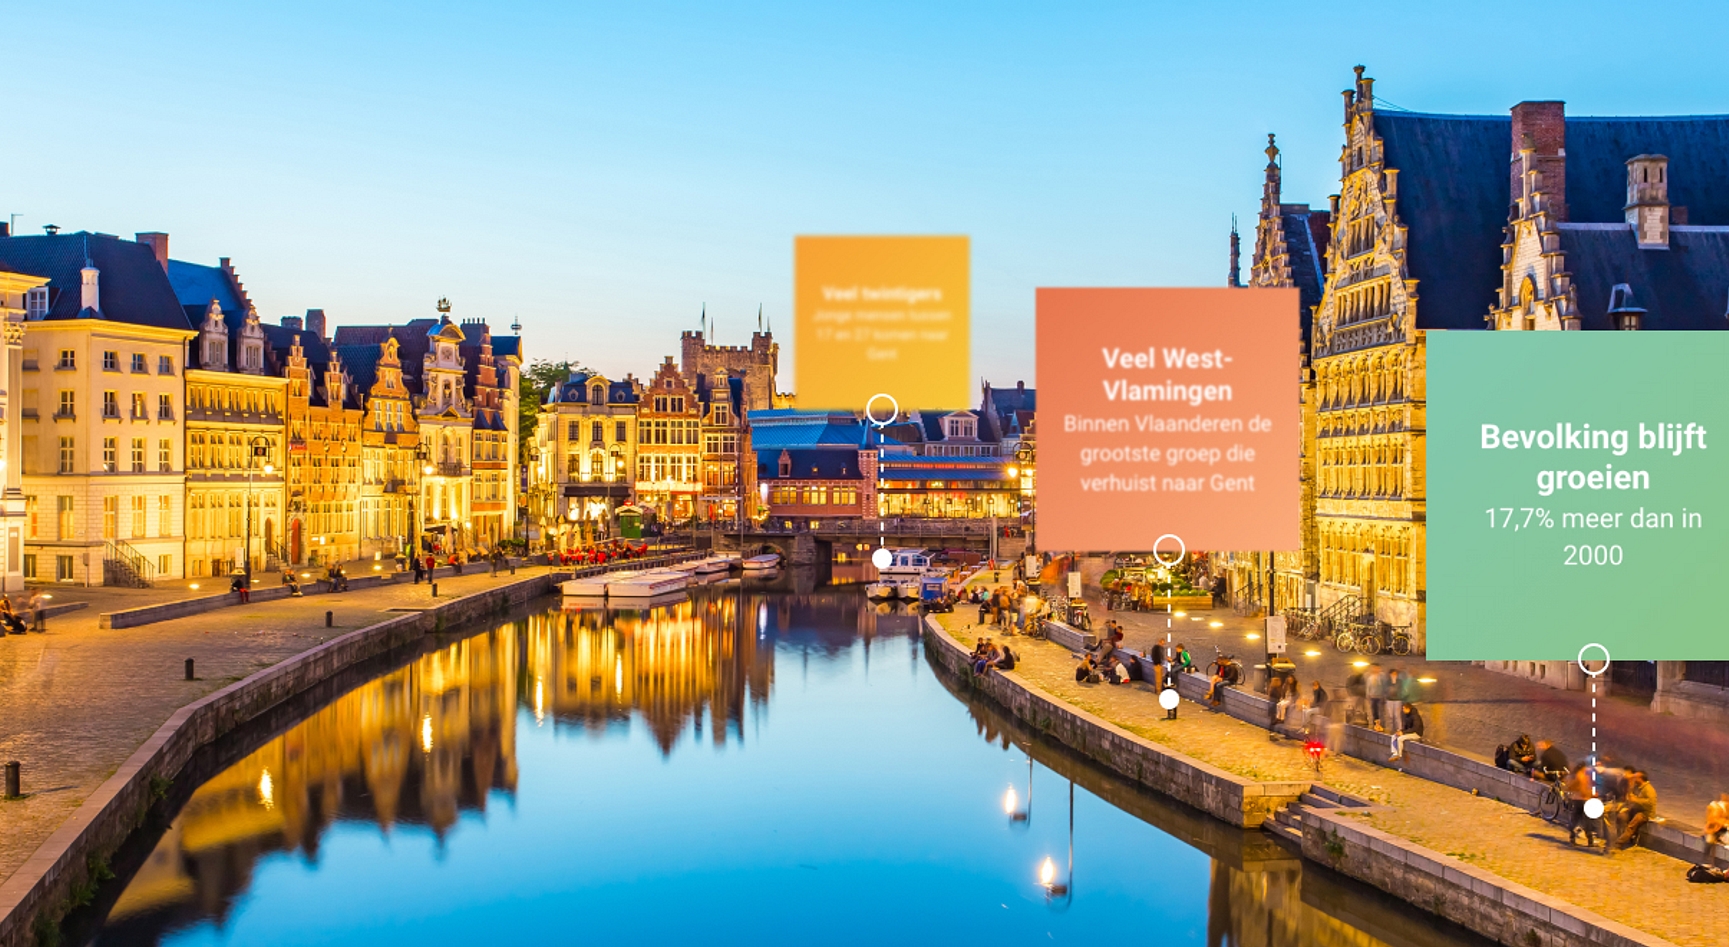 Experiencing the port of Antwerp through educational games